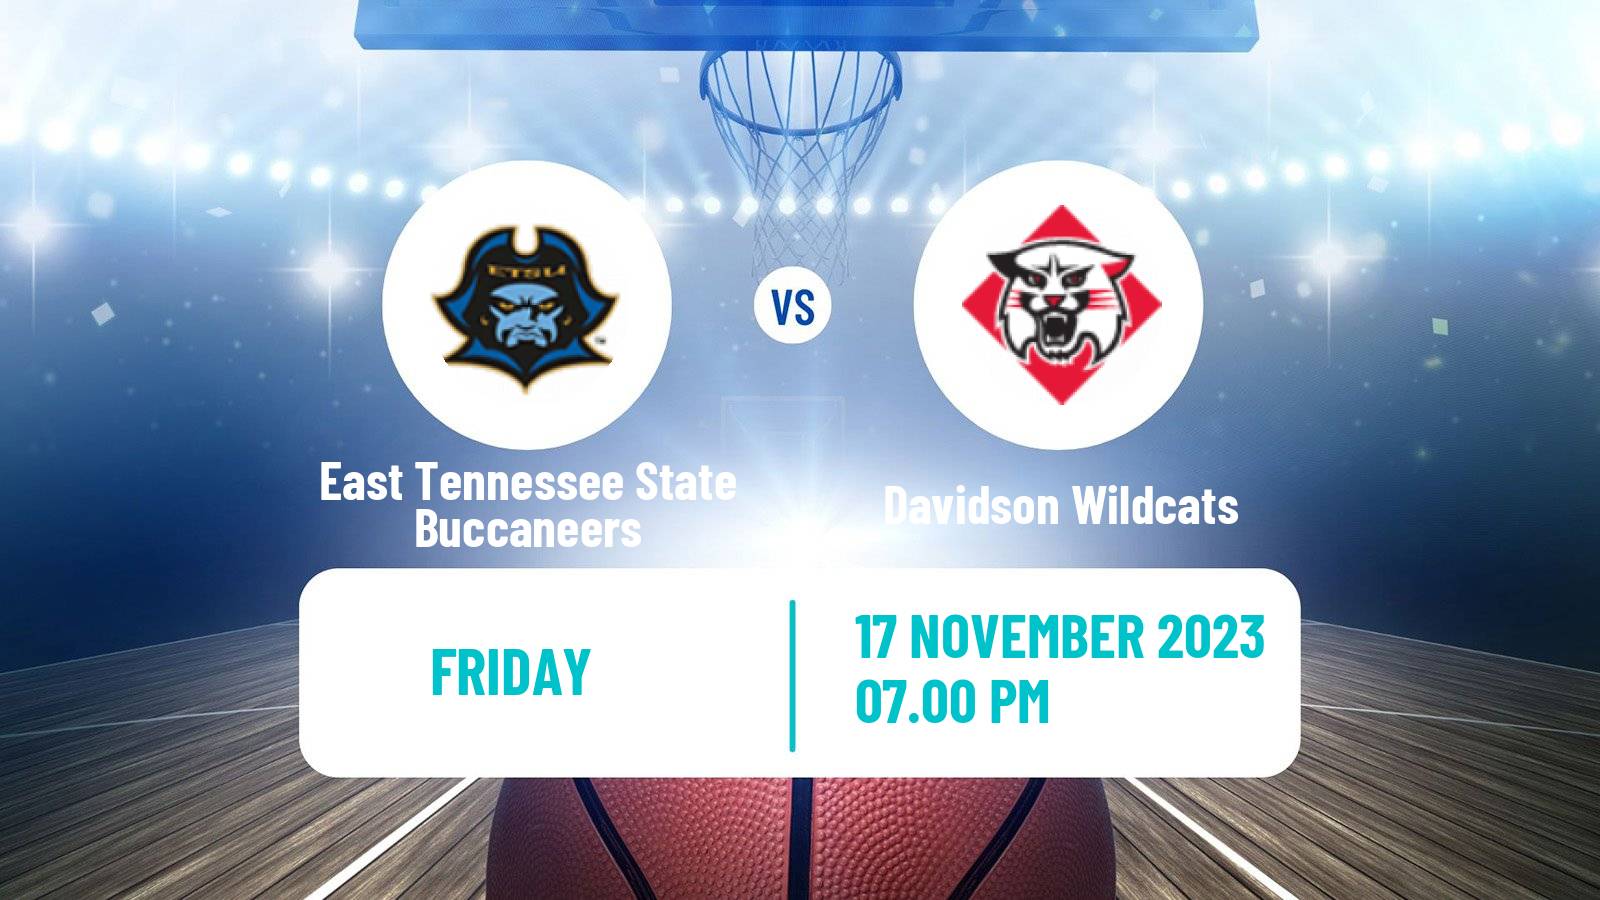 Basketball NCAA College Basketball East Tennessee State Buccaneers - Davidson Wildcats